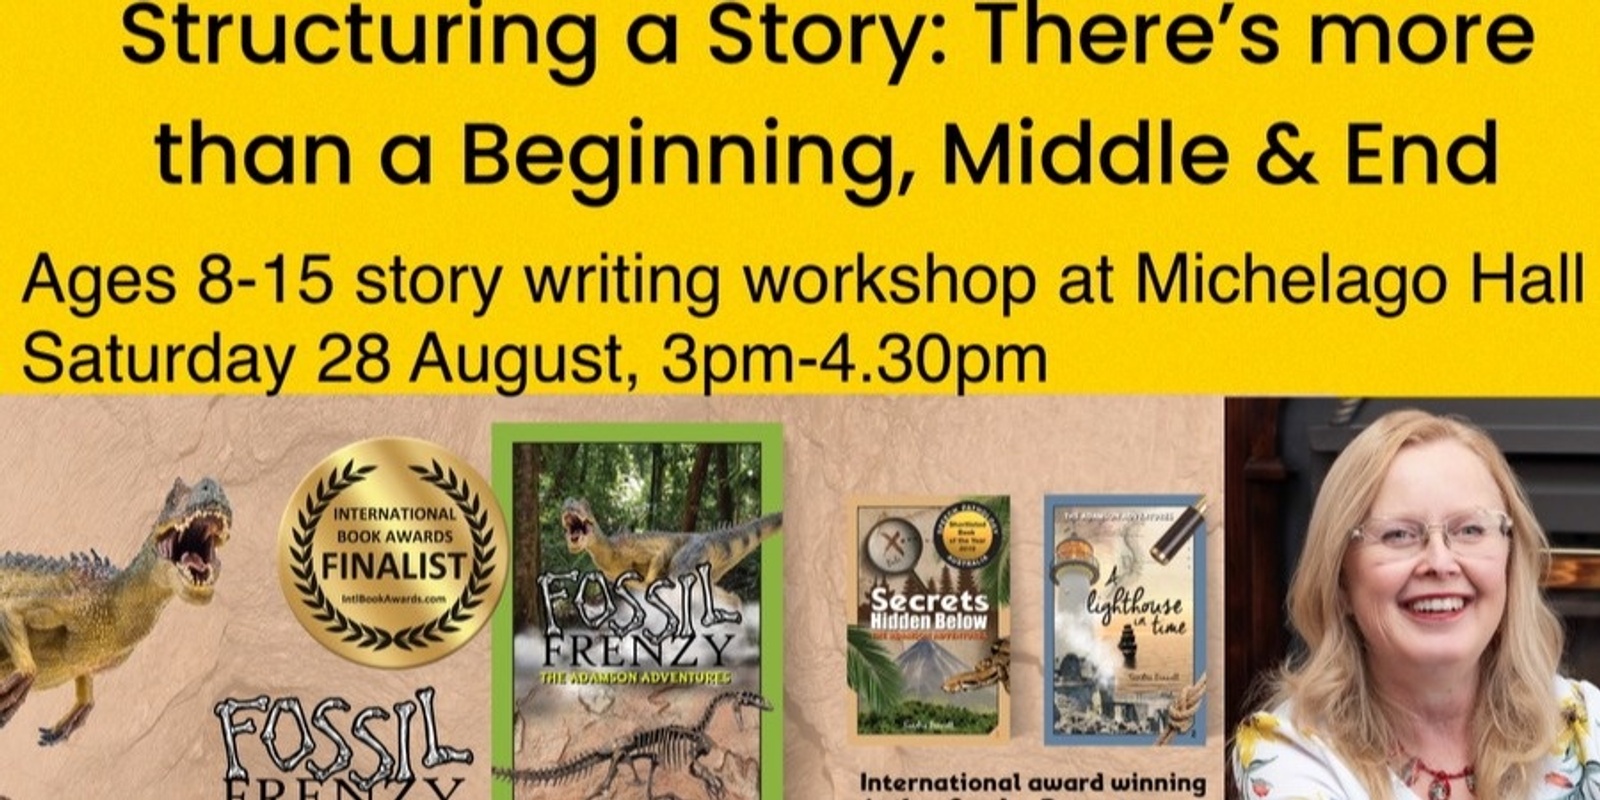 Banner image for CANCELLED DUE TO COVID: Structuring a Story - There's more than a Beginning, Middle and End